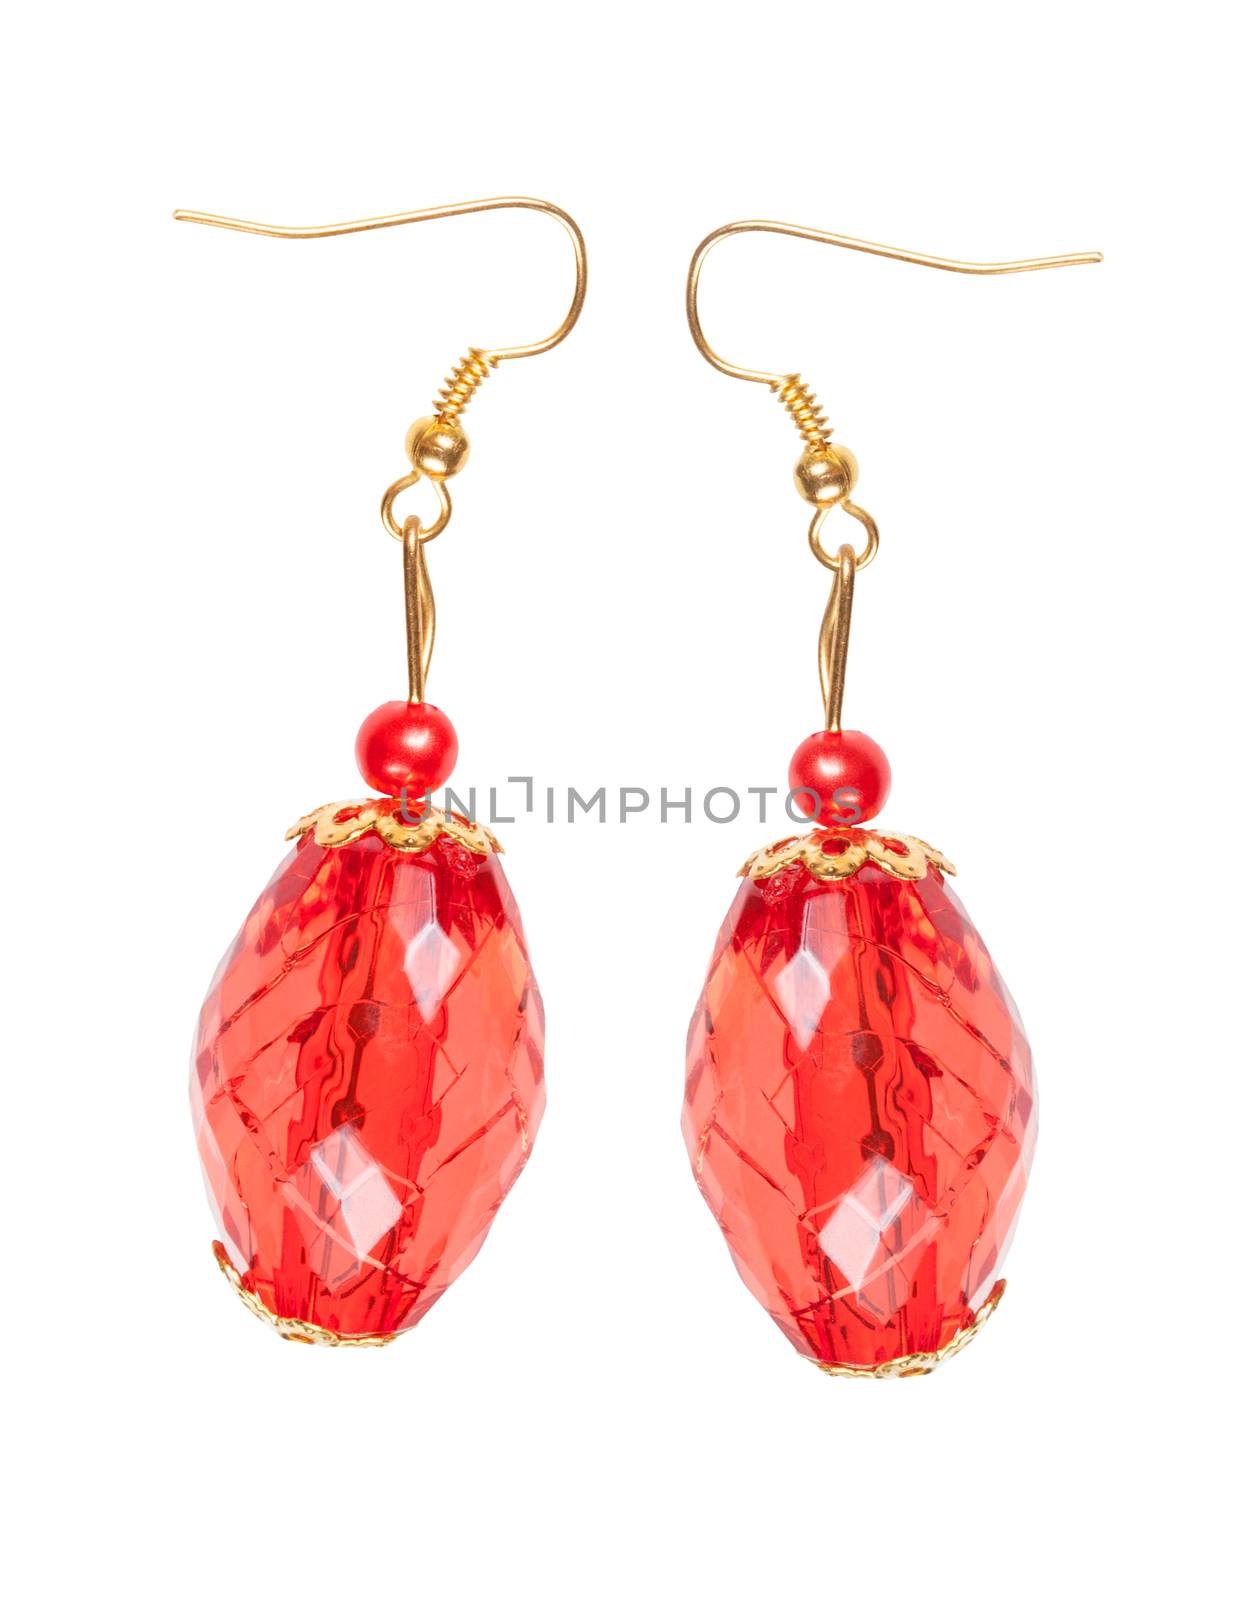 Earrings in red glass with gold elements isolated on a white background. Collage.